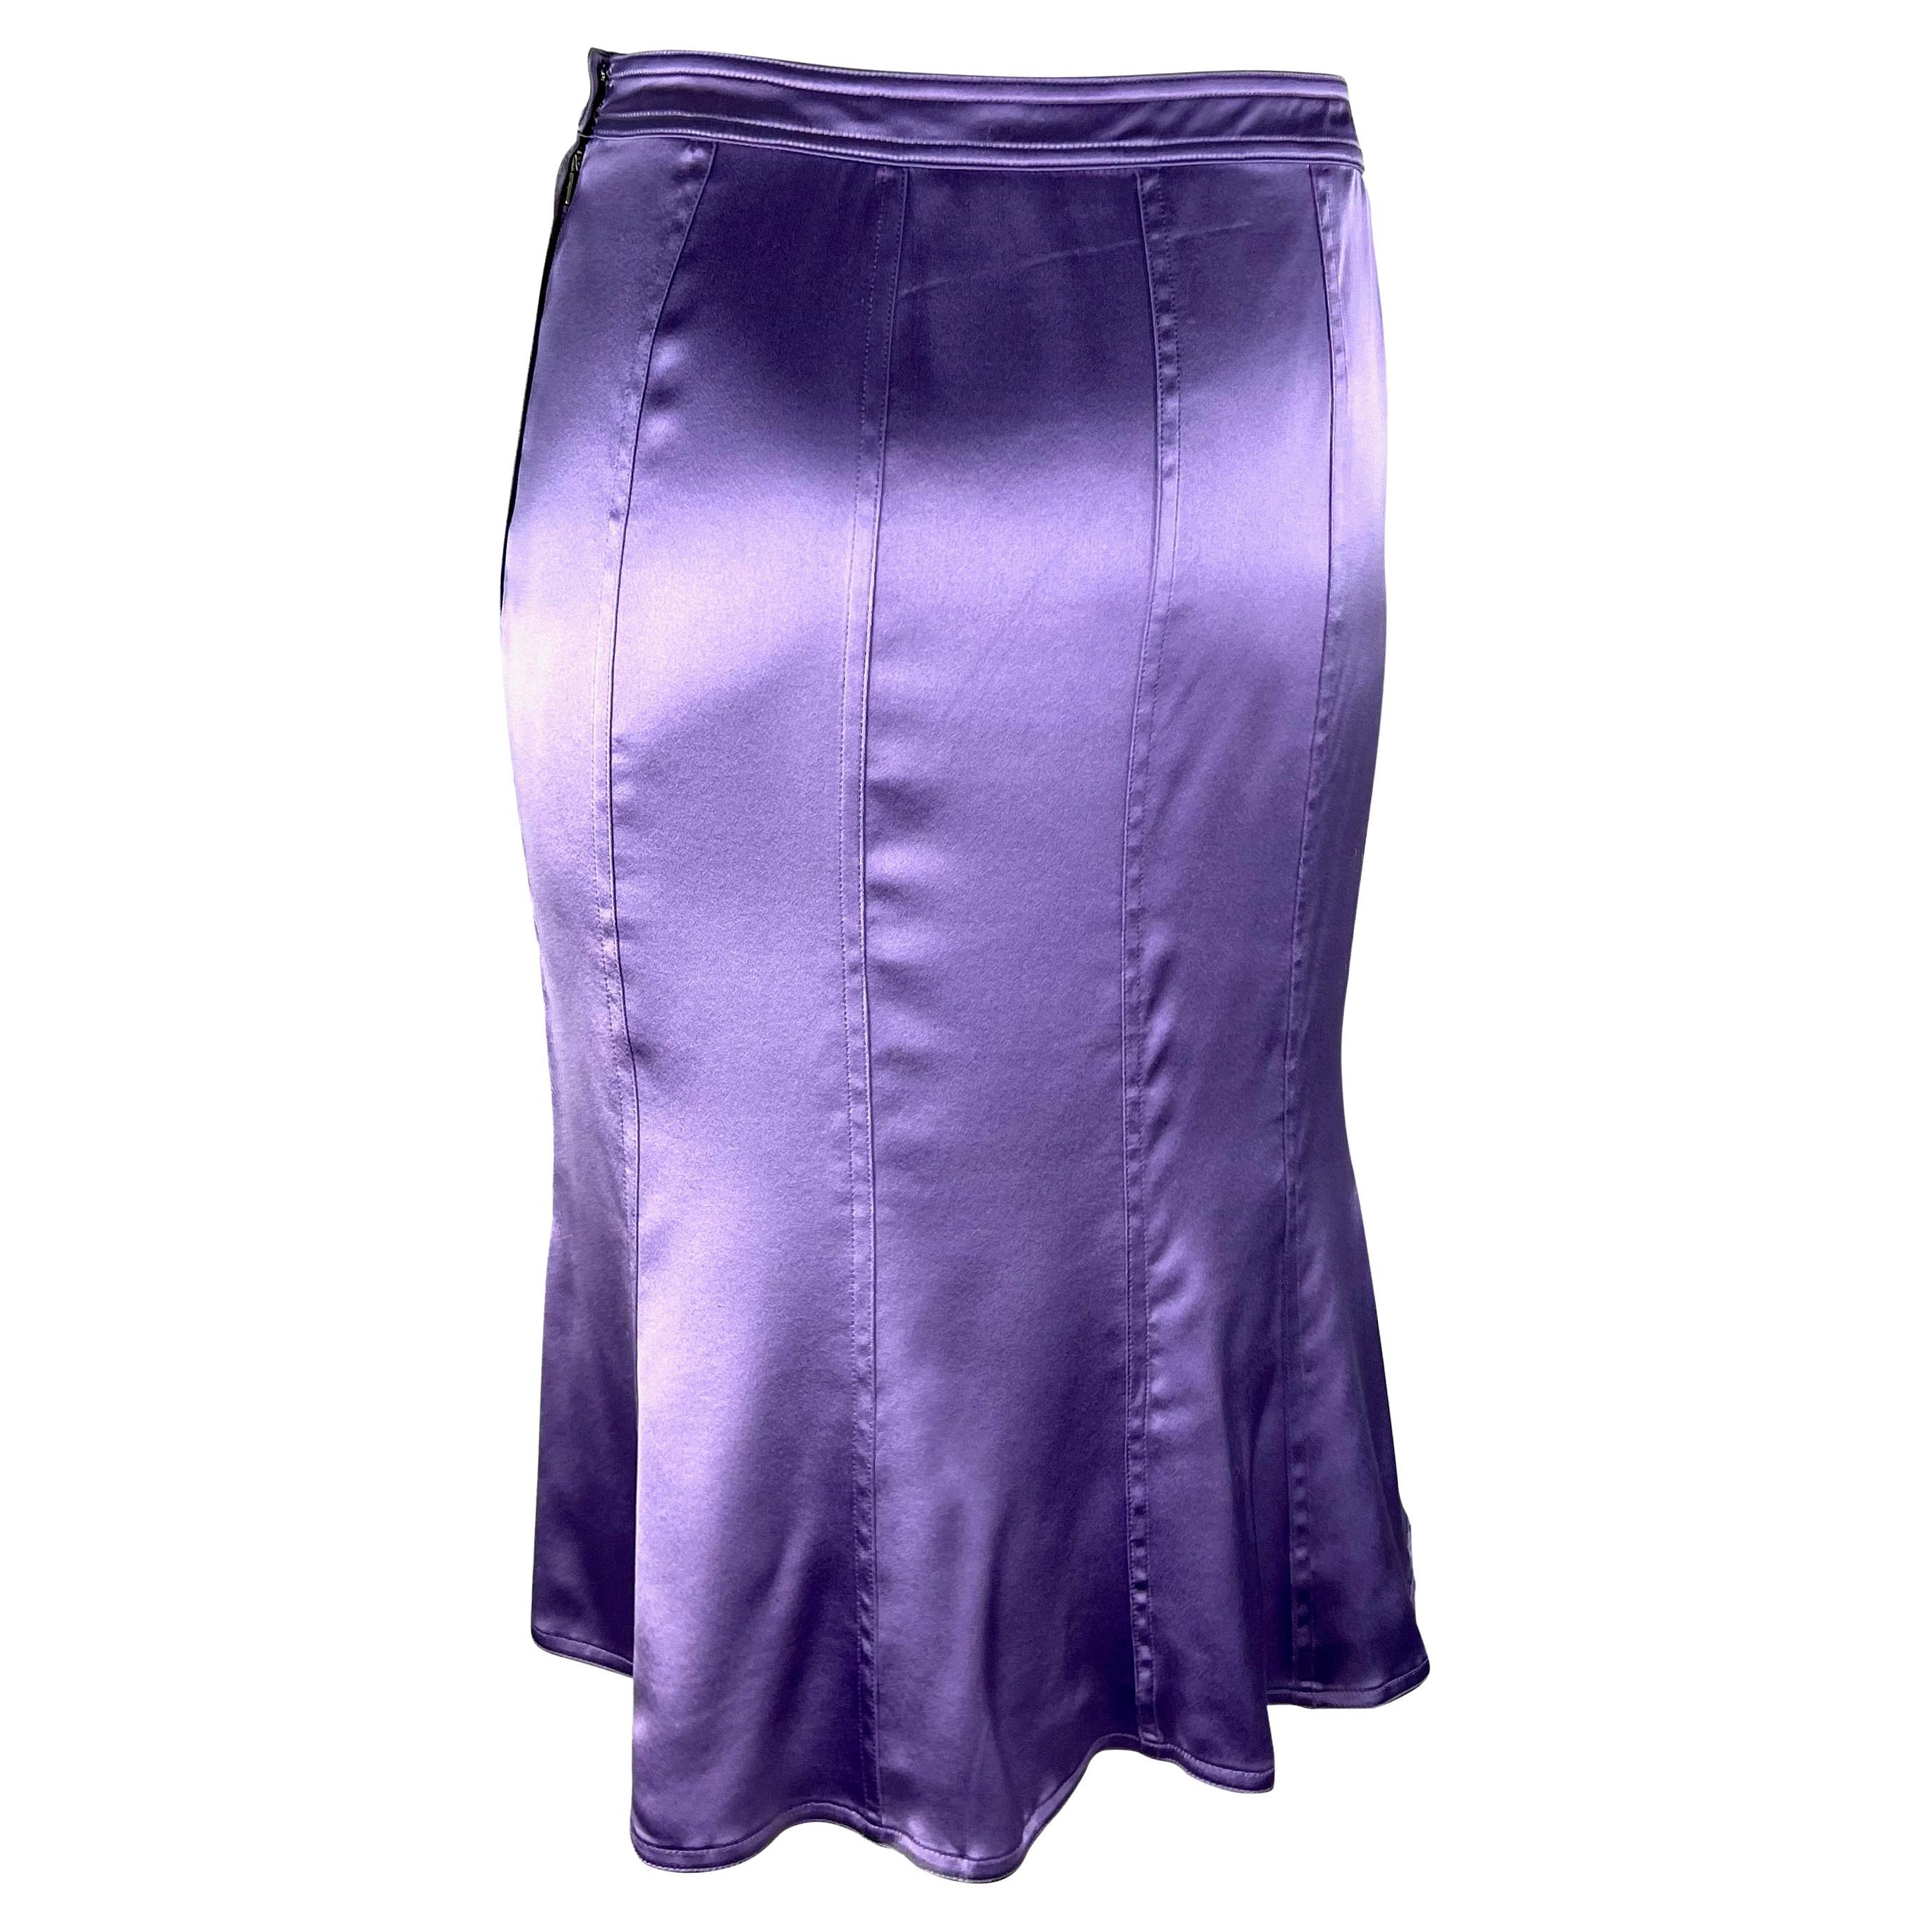 F/W 2003 Yves Saint Laurent by Tom Ford Lavender Silk Satin Flare Skirt In Excellent Condition For Sale In West Hollywood, CA